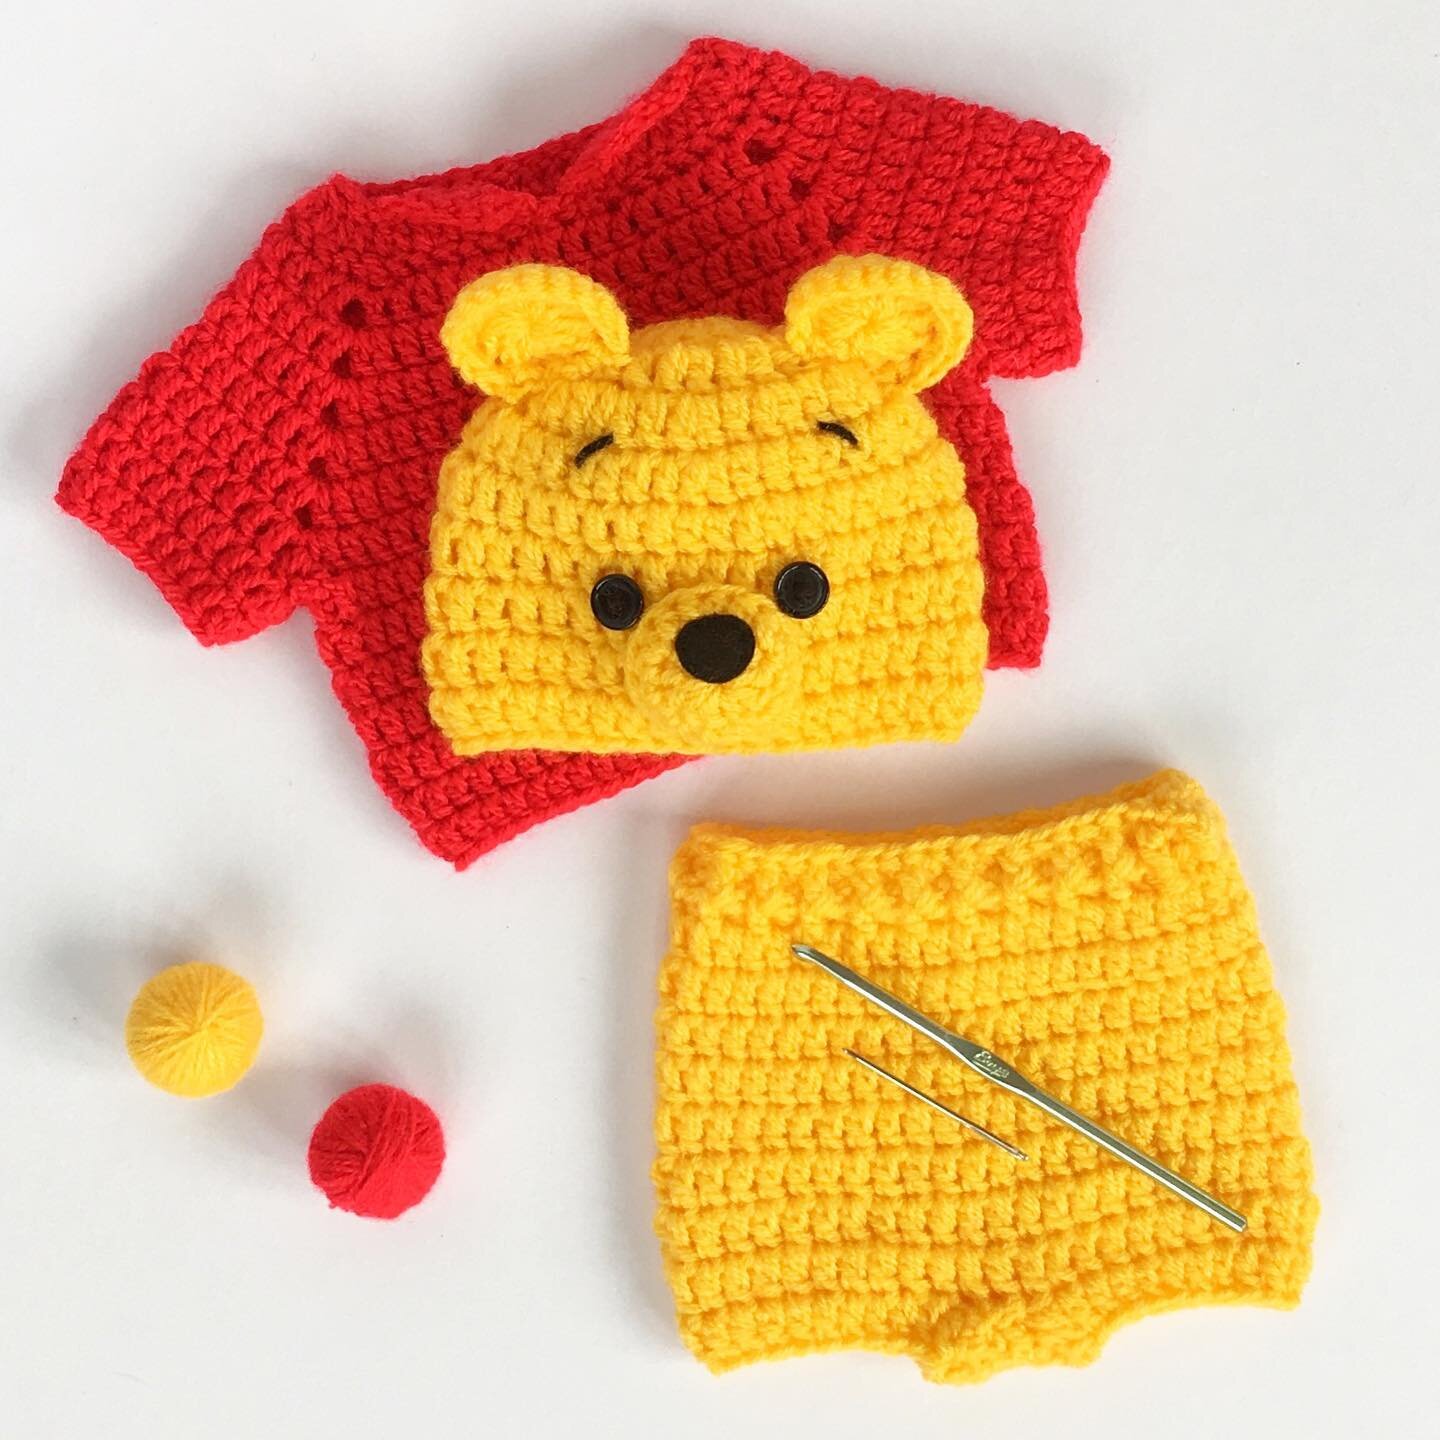 Happy Saturday! 
I&rsquo;ve been busy with @k_beanies so I haven&rsquo;t posted much here lately but this newborn set I just finish for a friend is too cute not to include here. 😍 
______________________________✍️ #winniethepooh #poohbear #kawaii #i